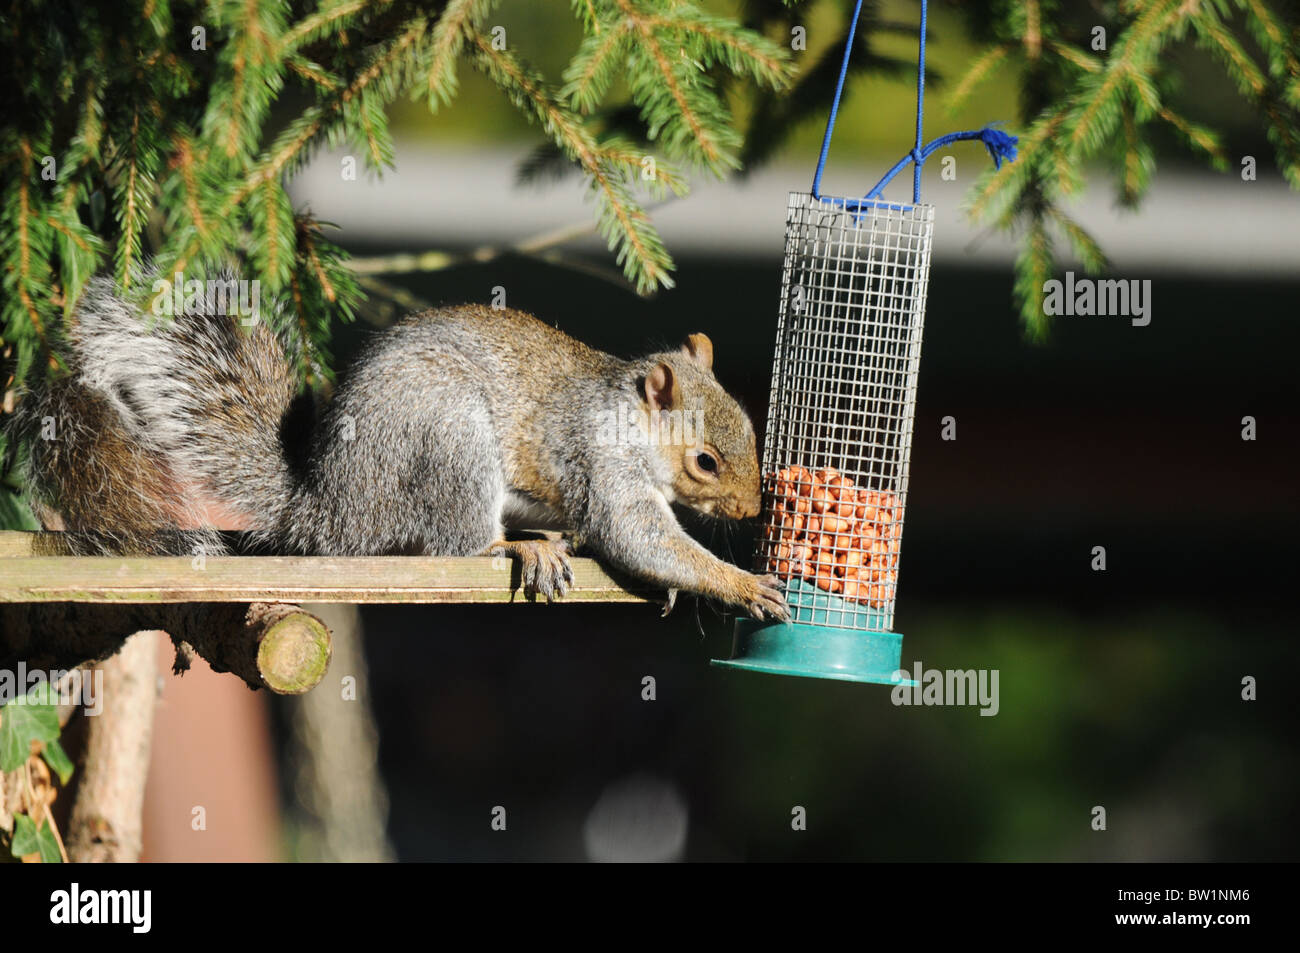 Grey squirrel eating nuts from a bird feeder Stock Photo